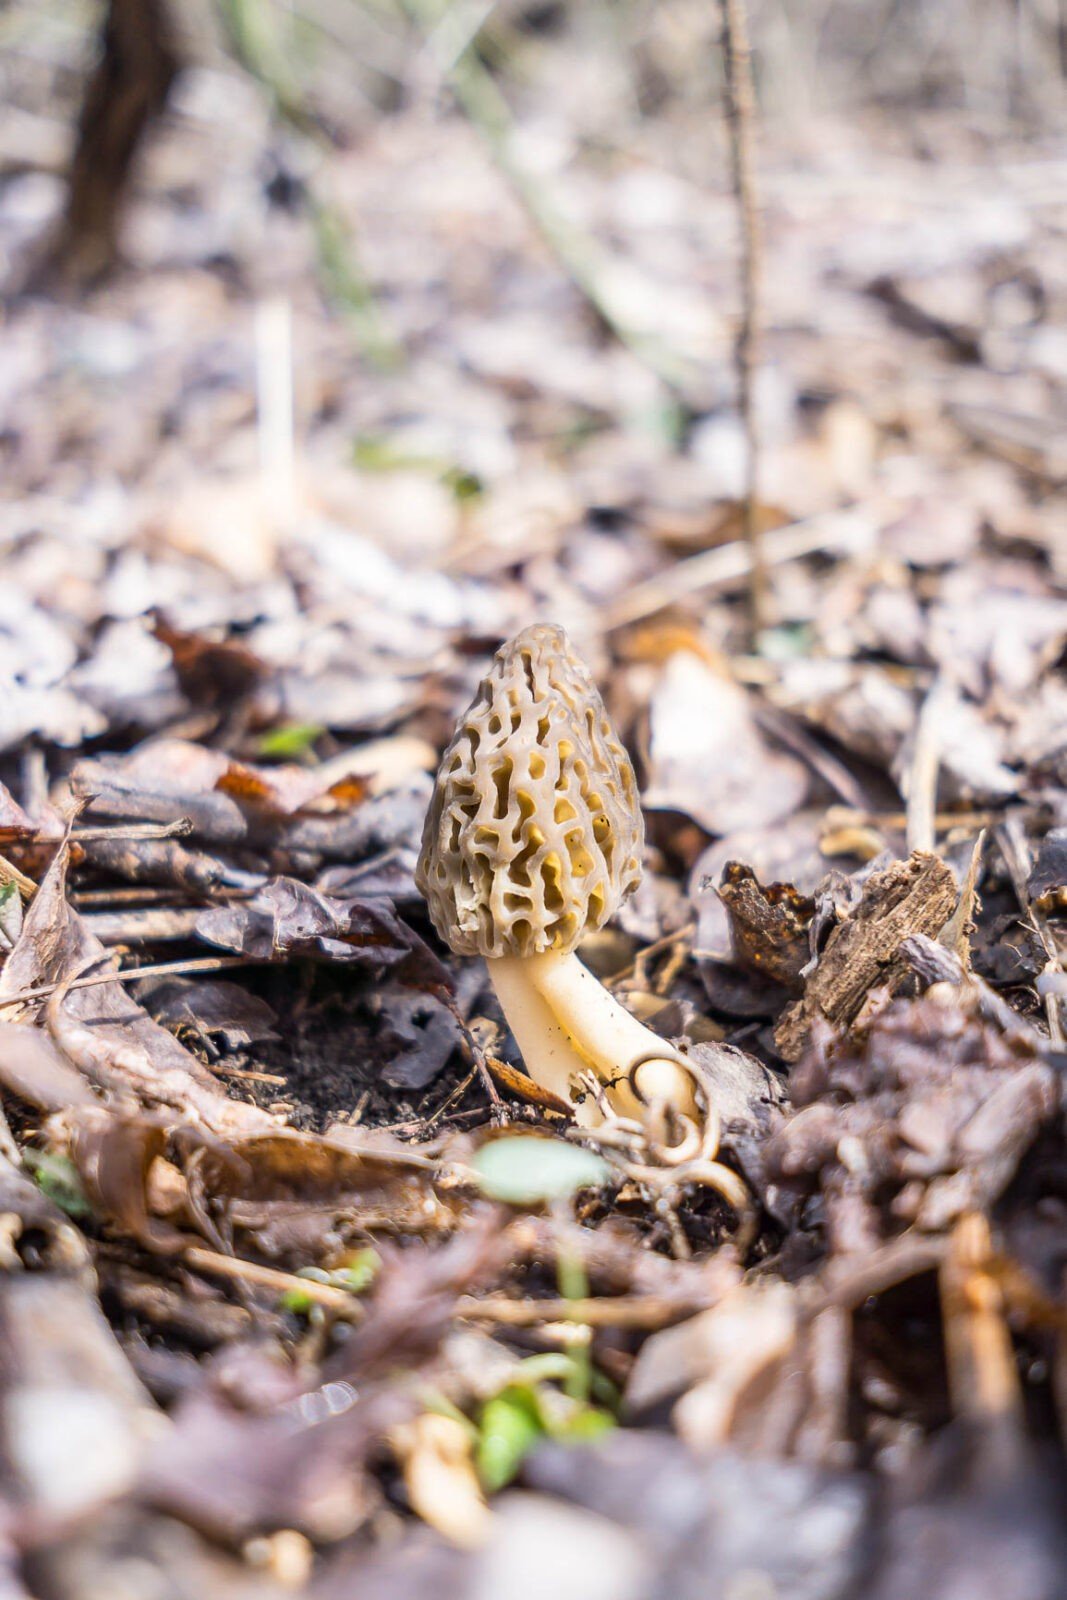 How to Clean and Store Morel Mushrooms